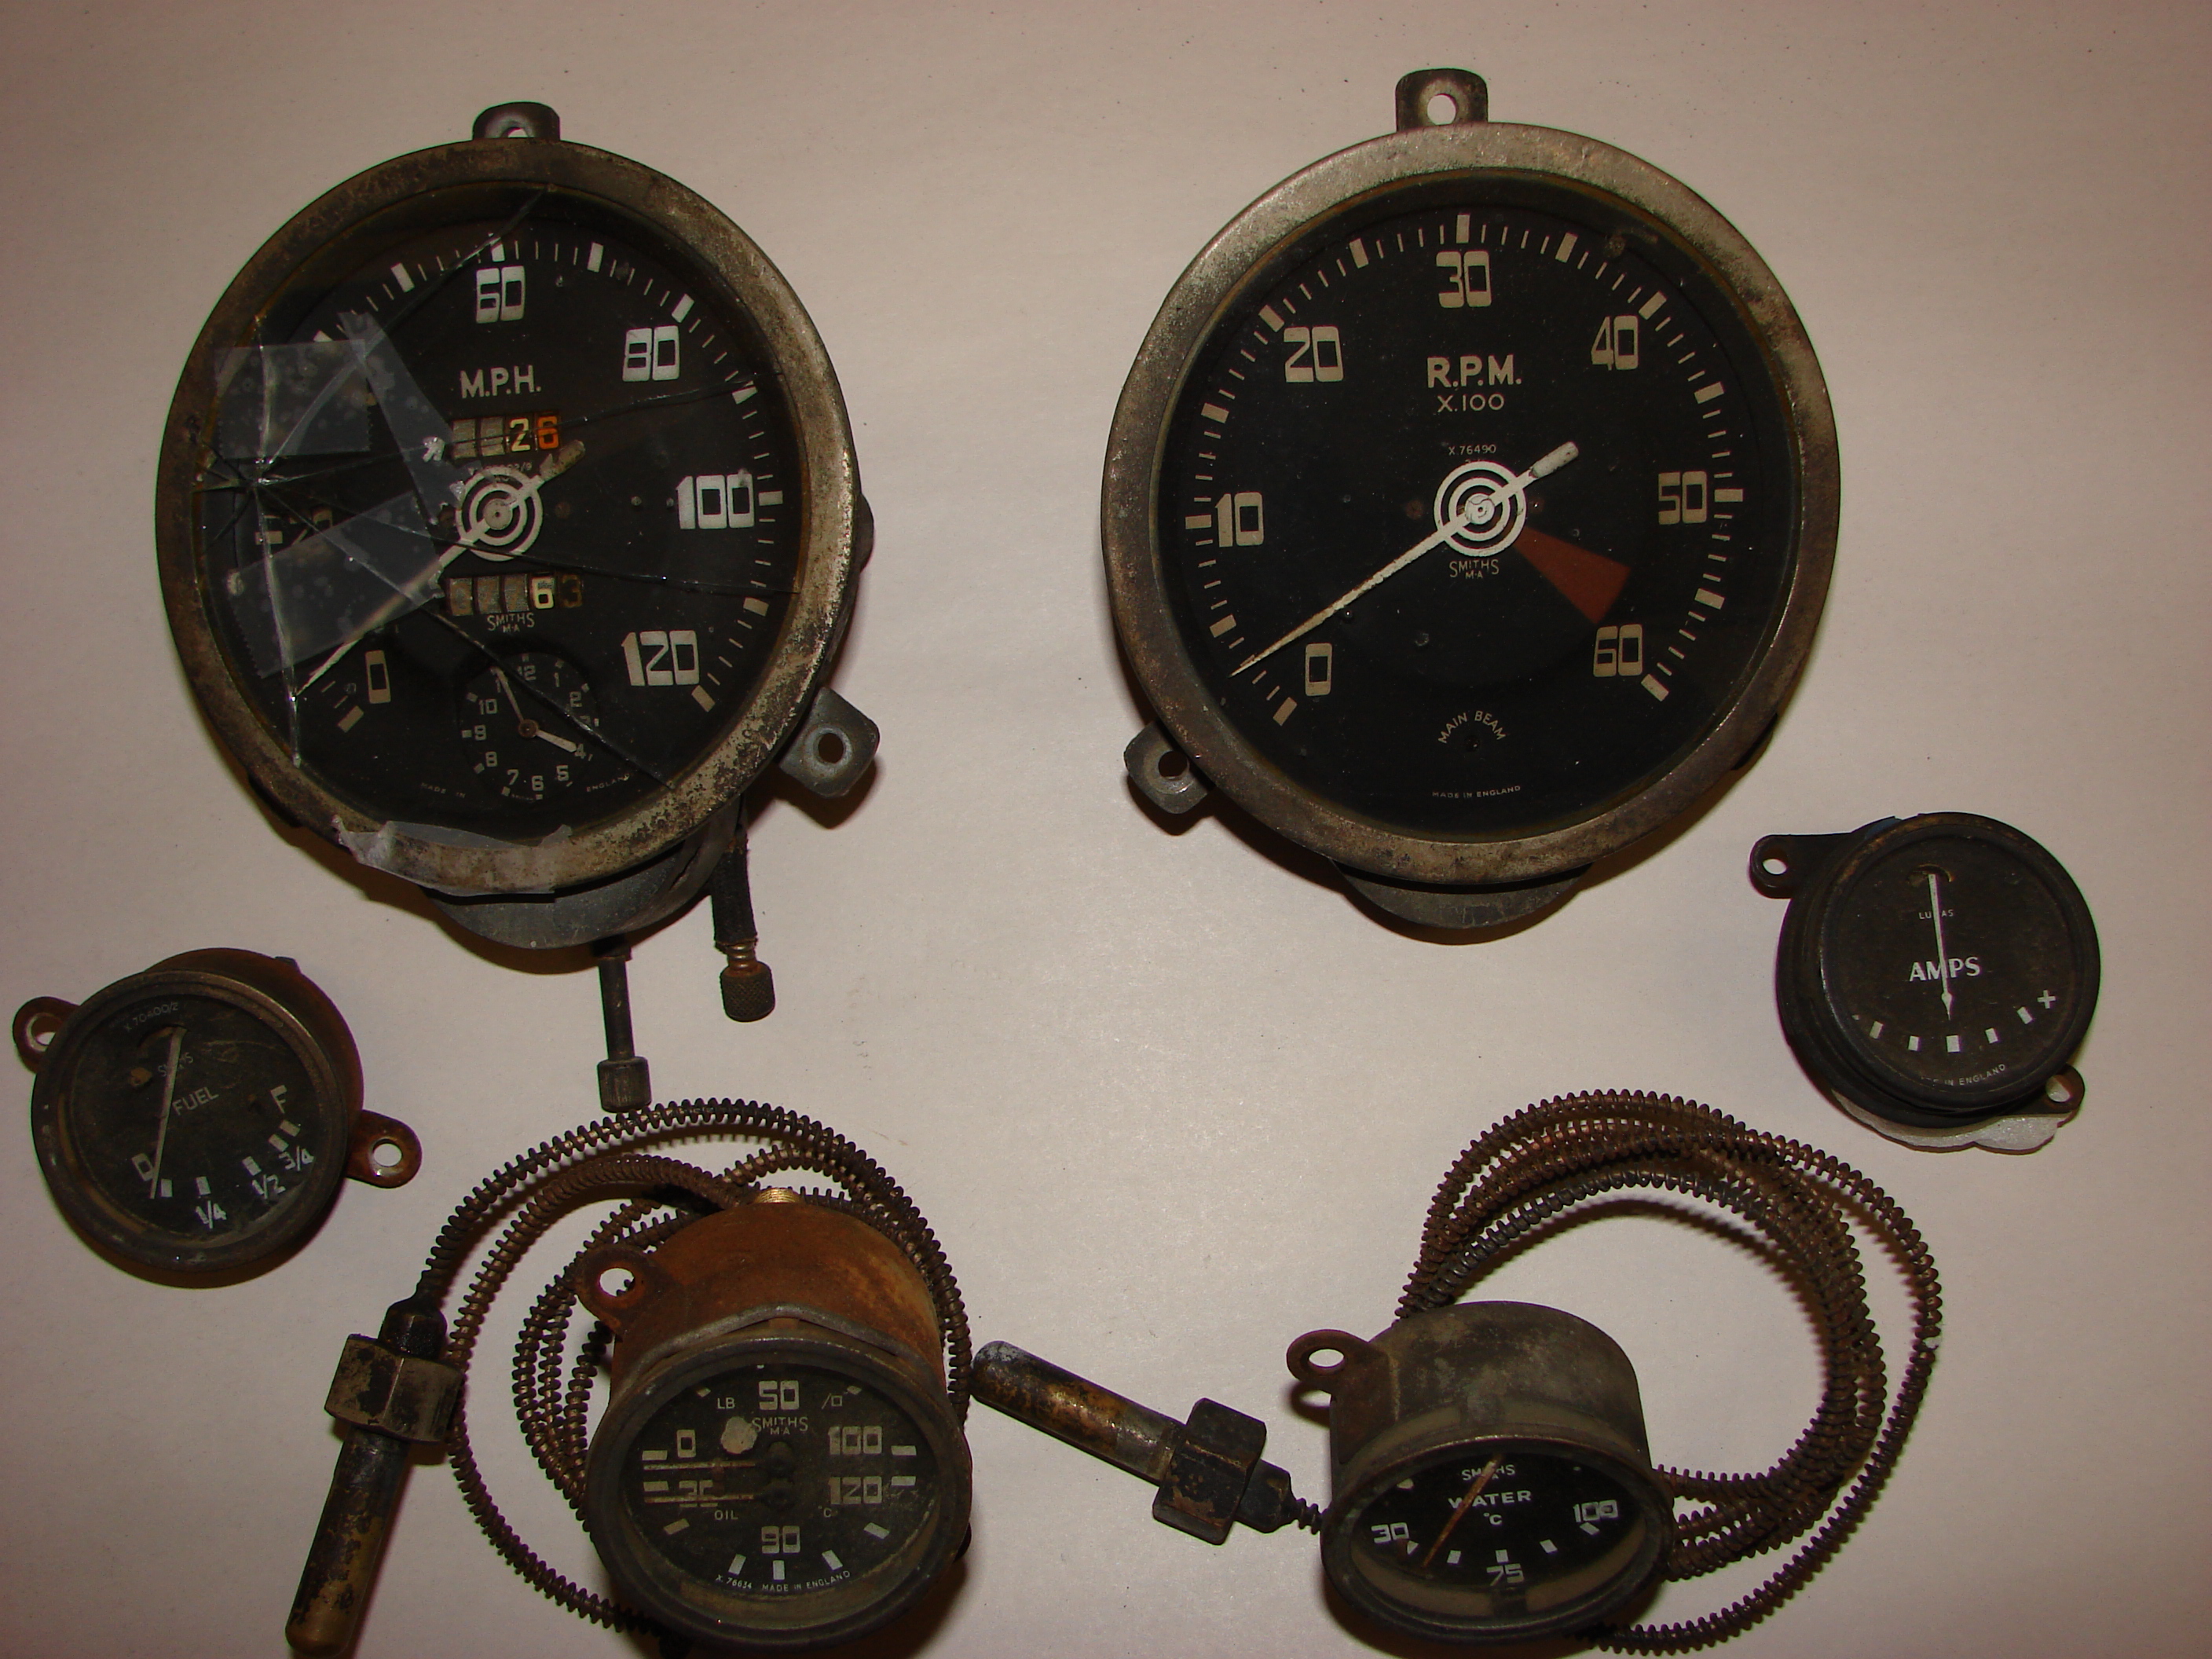 Old and dirty speedometers and car instruments